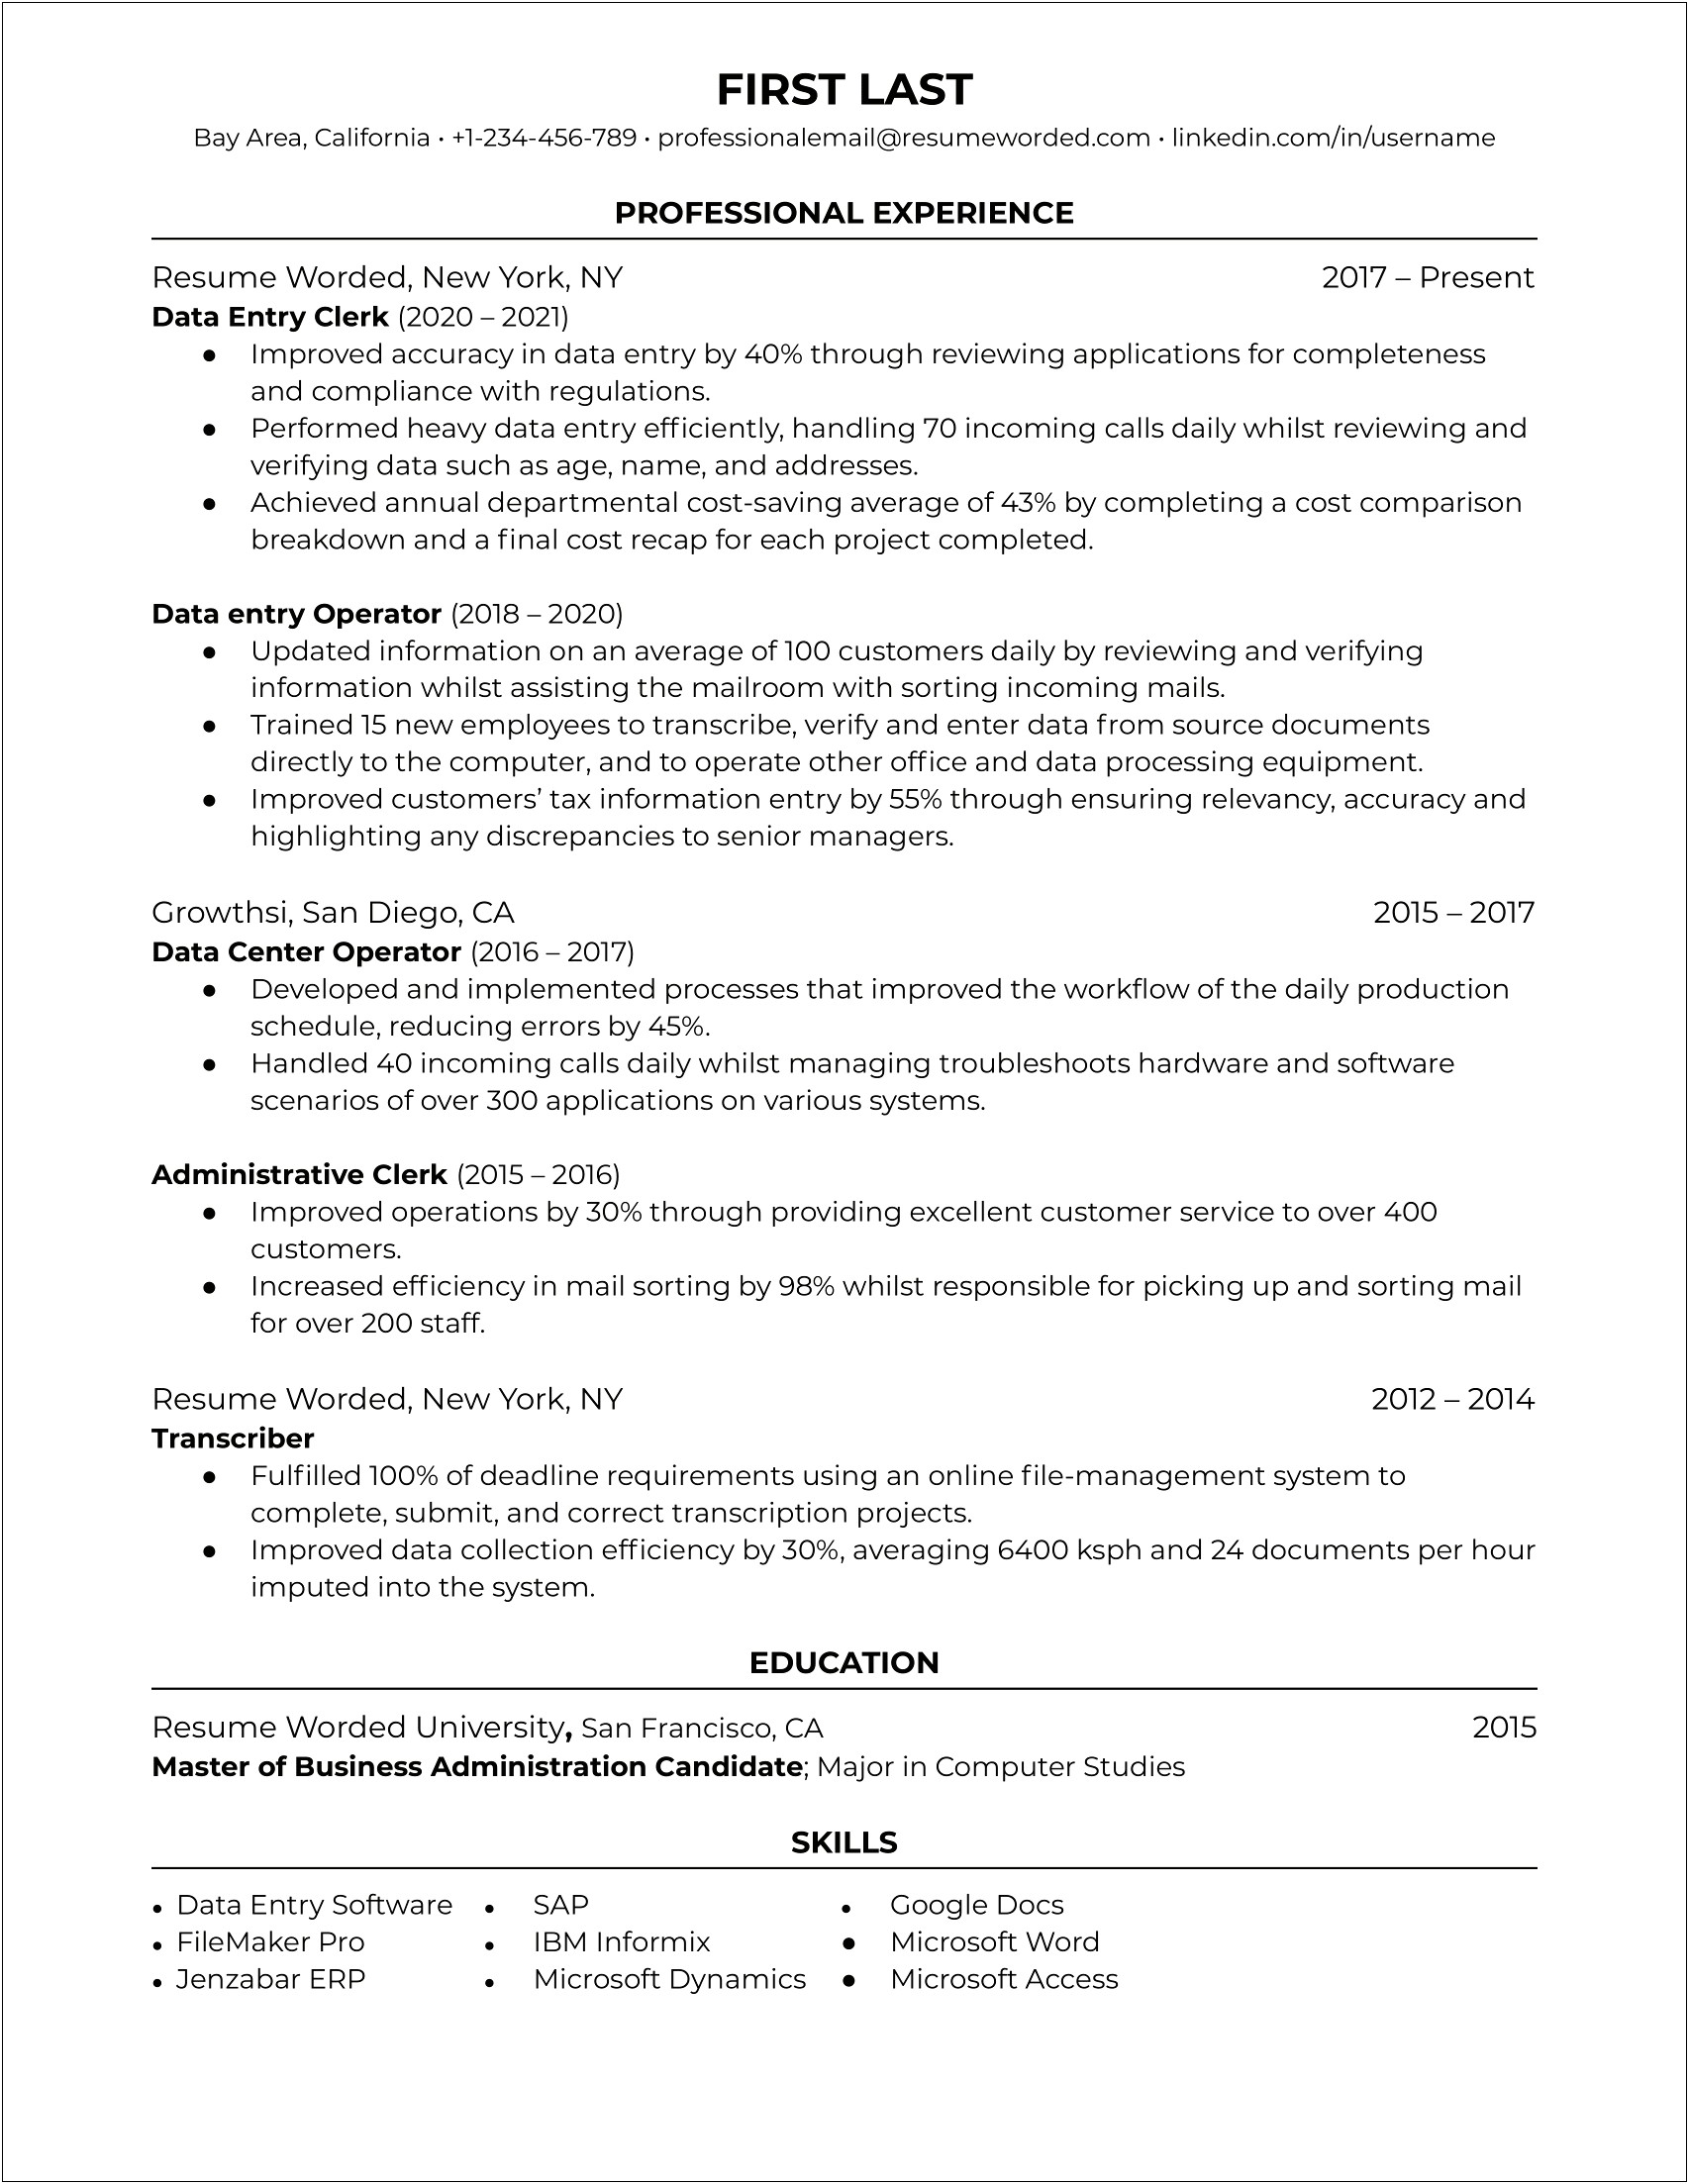 Data Entry Specialist Resume Objective